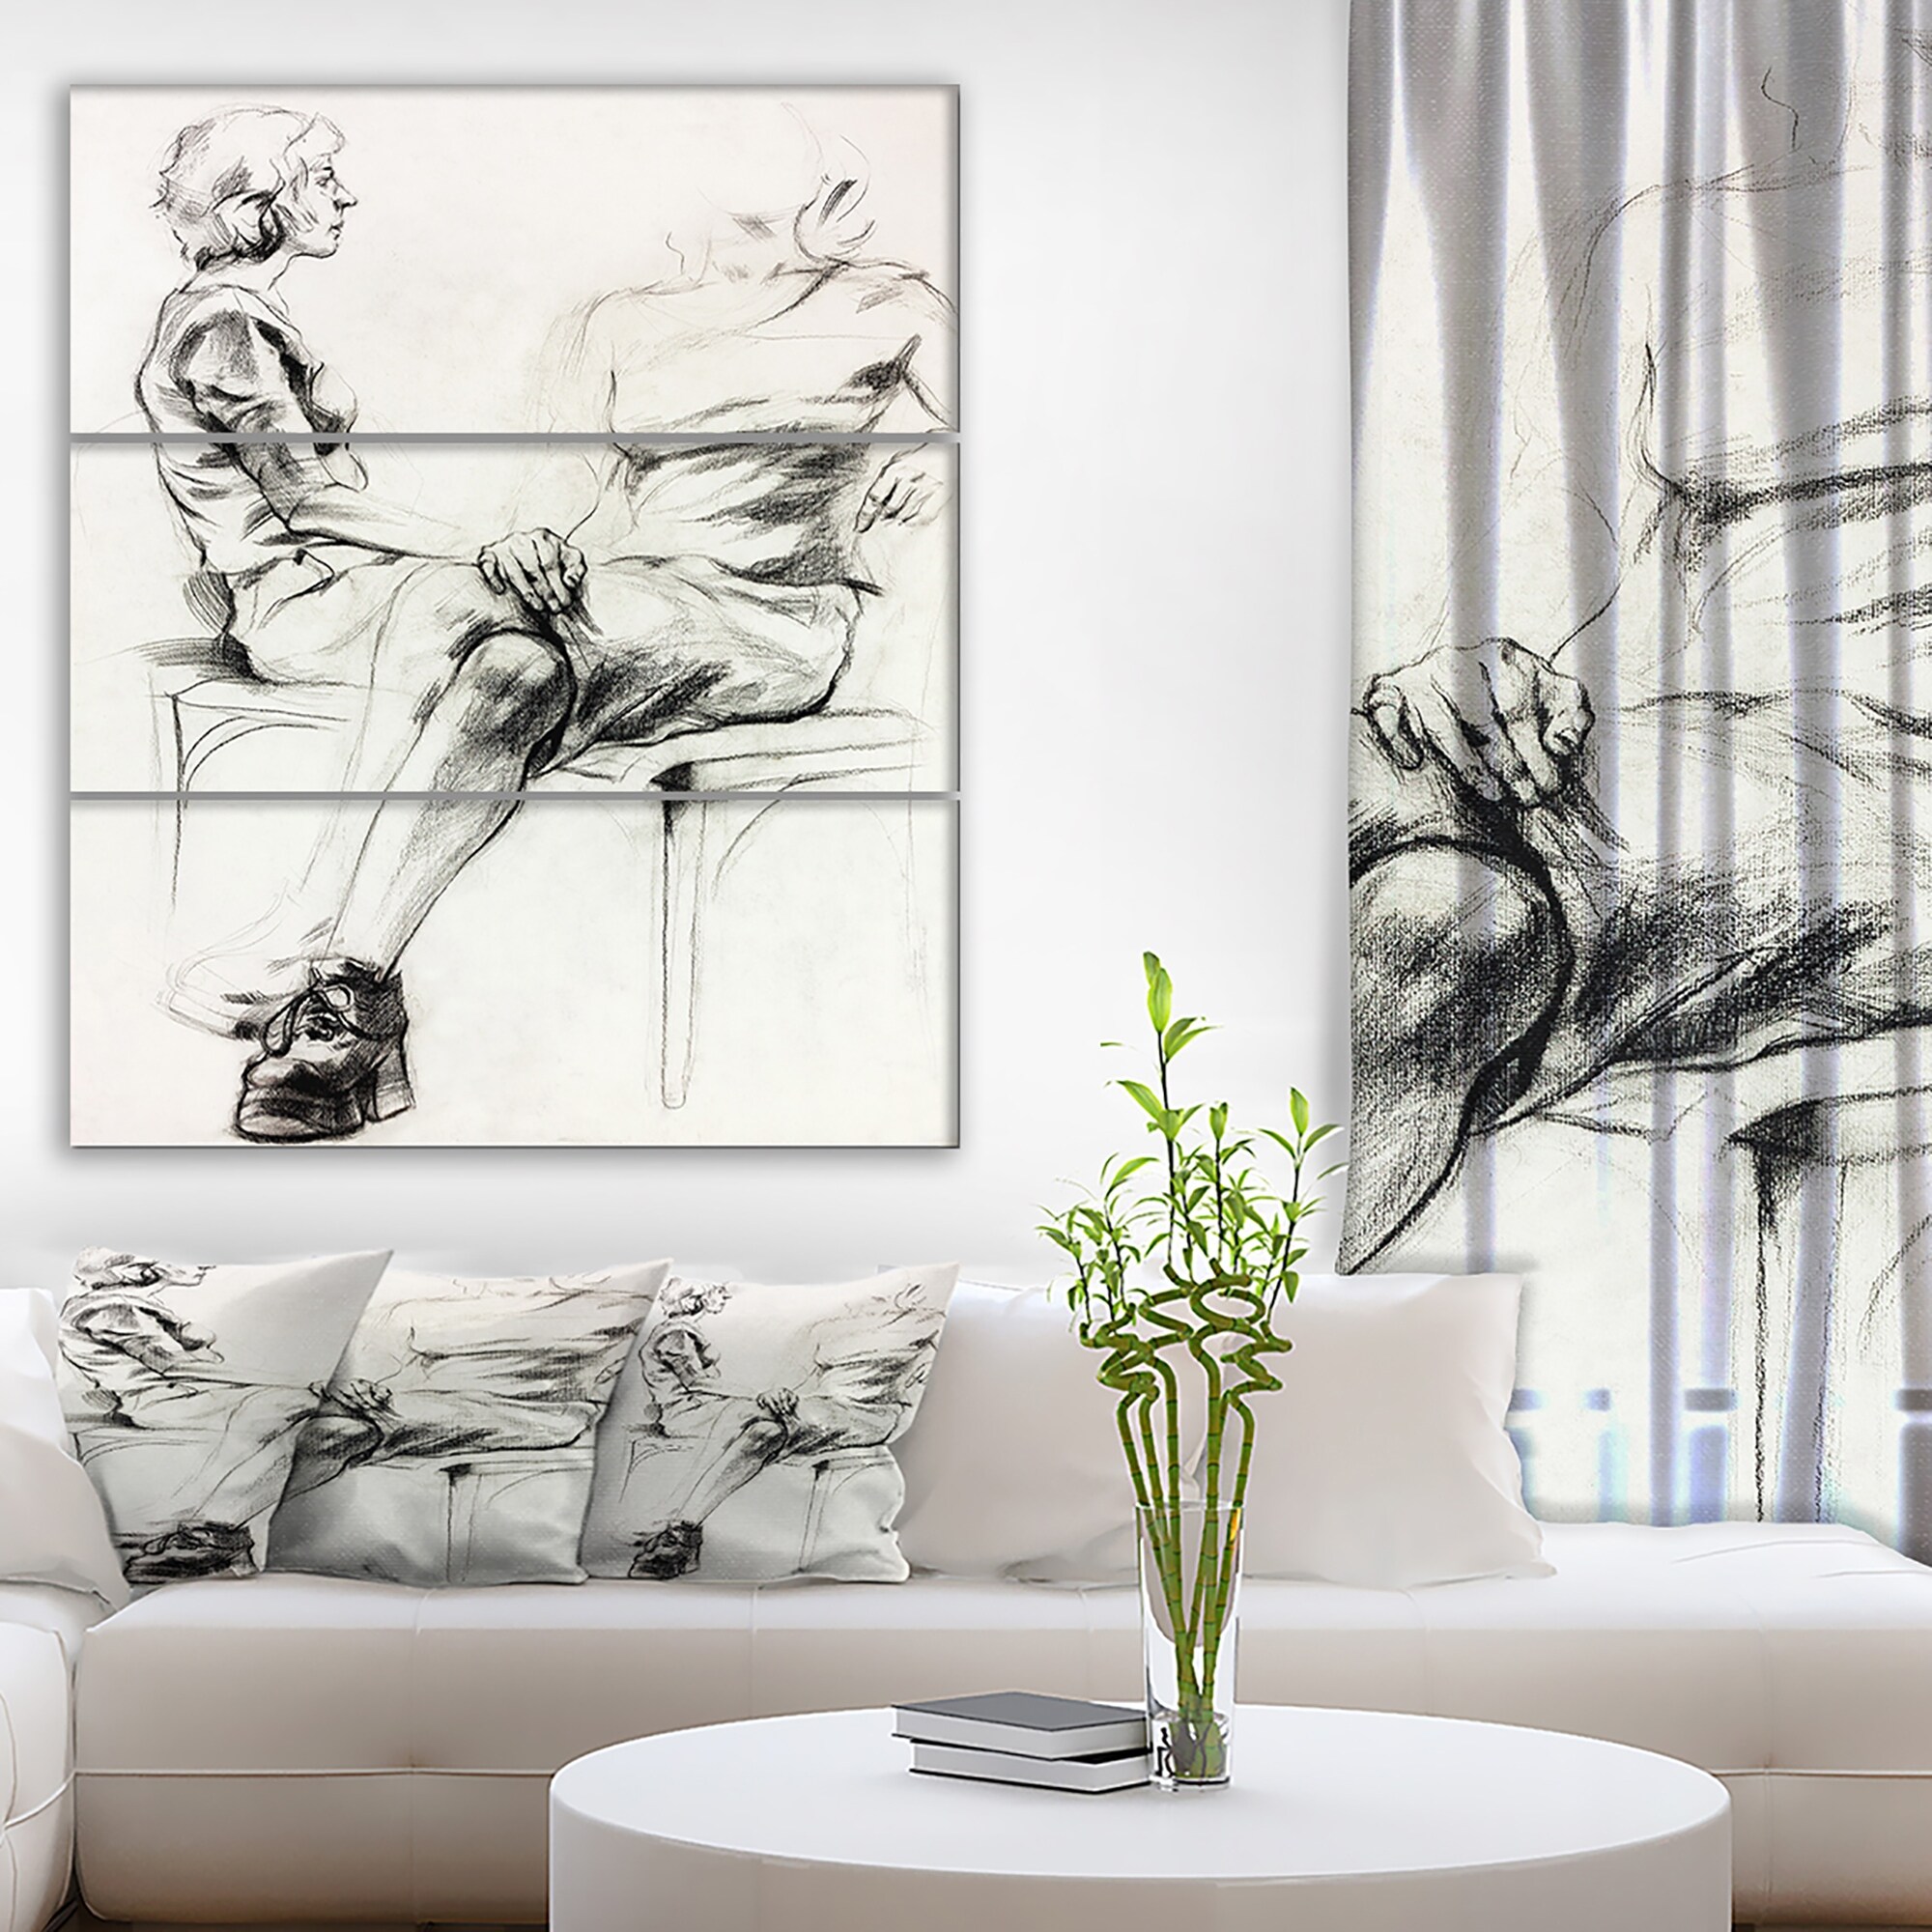 https://ak1.ostkcdn.com/images/products/is/images/direct/526ba38fb3419880270e764803ef801ca0fc473e/Designart-%27Woman-sketch%27-Glamour-Print-on-Wrapped-Canvas-set---28x36---3-Panels.jpg